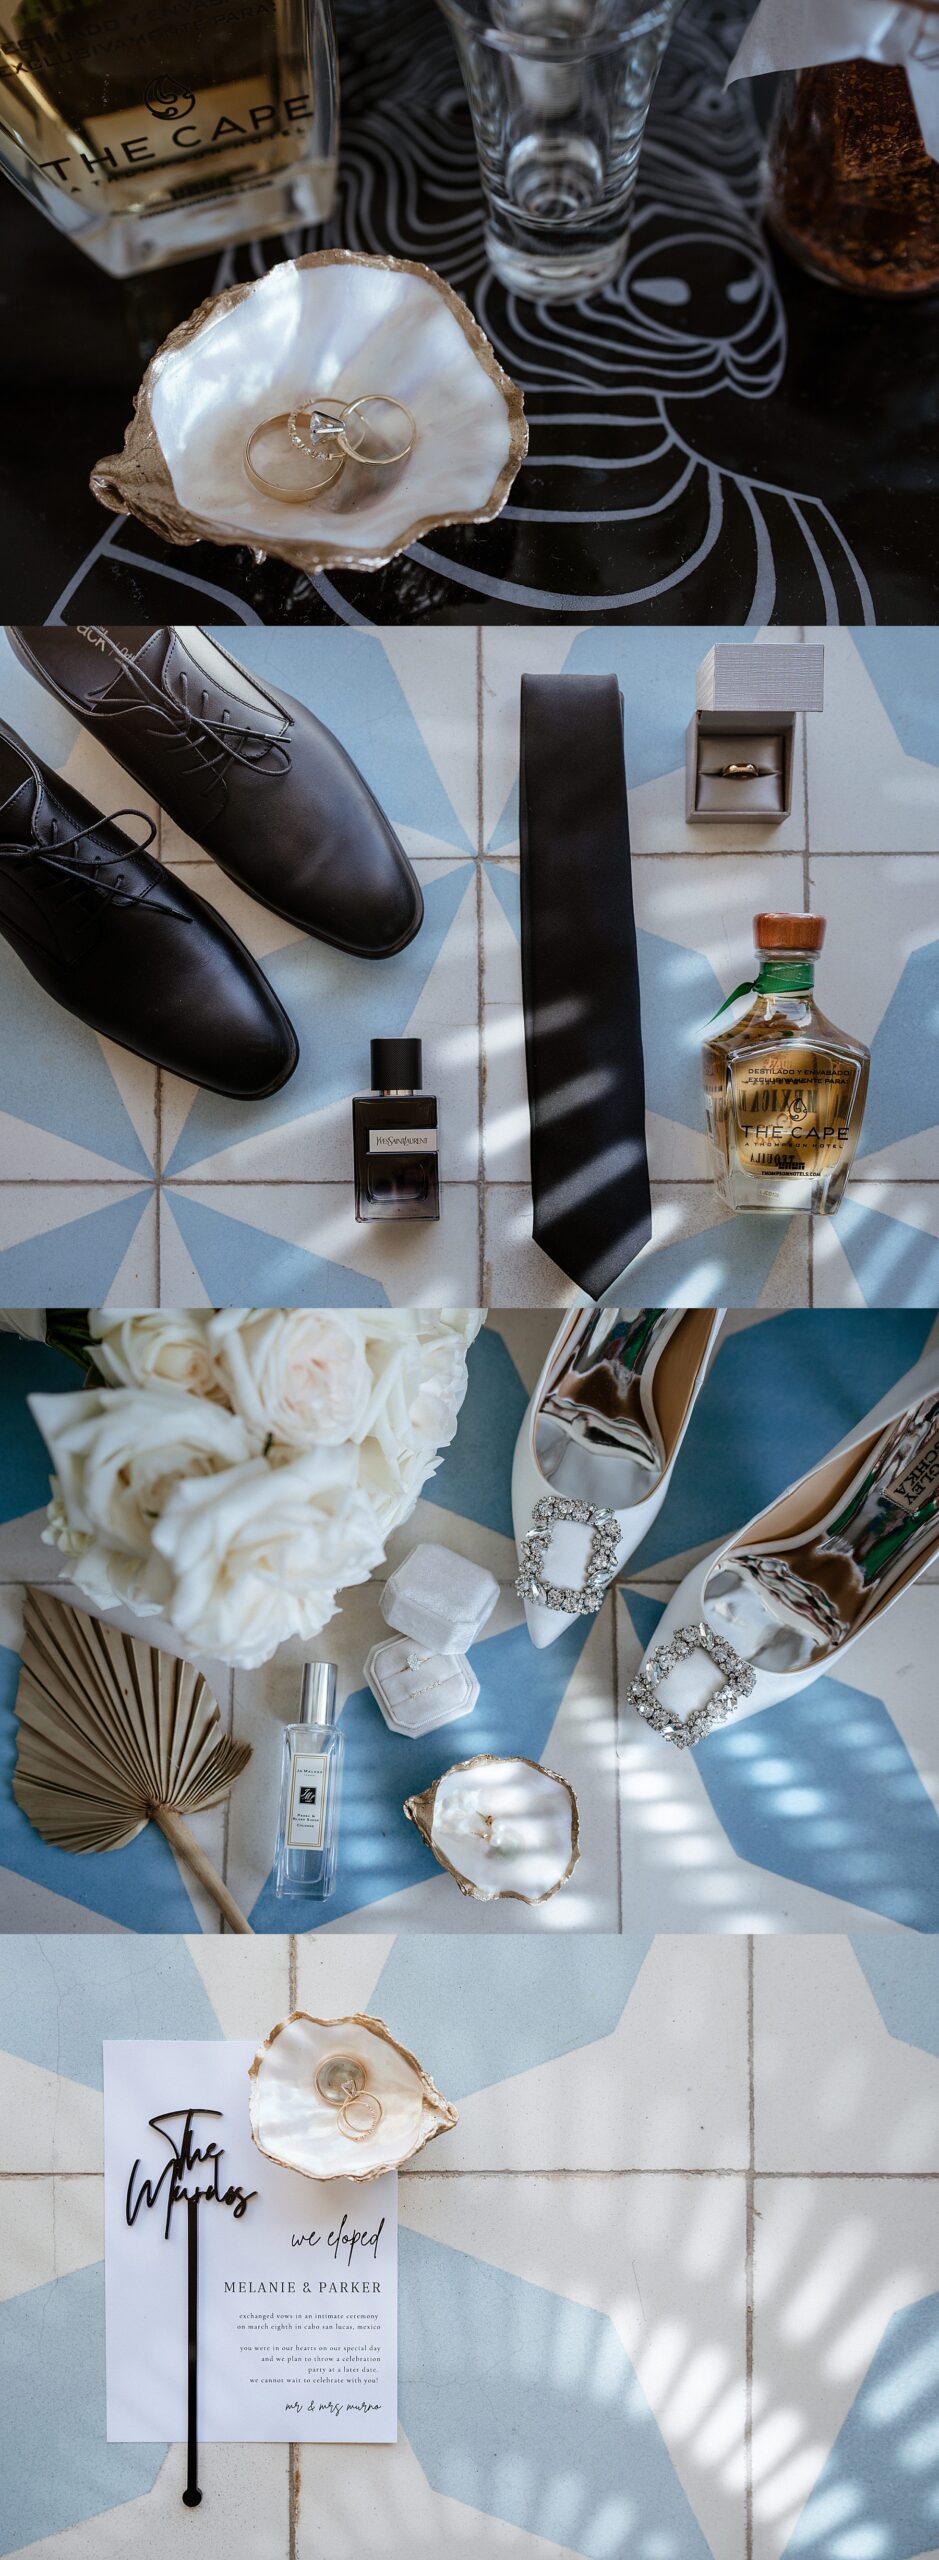 Wedding Day details The Cape Hotel Cabo San Lucas